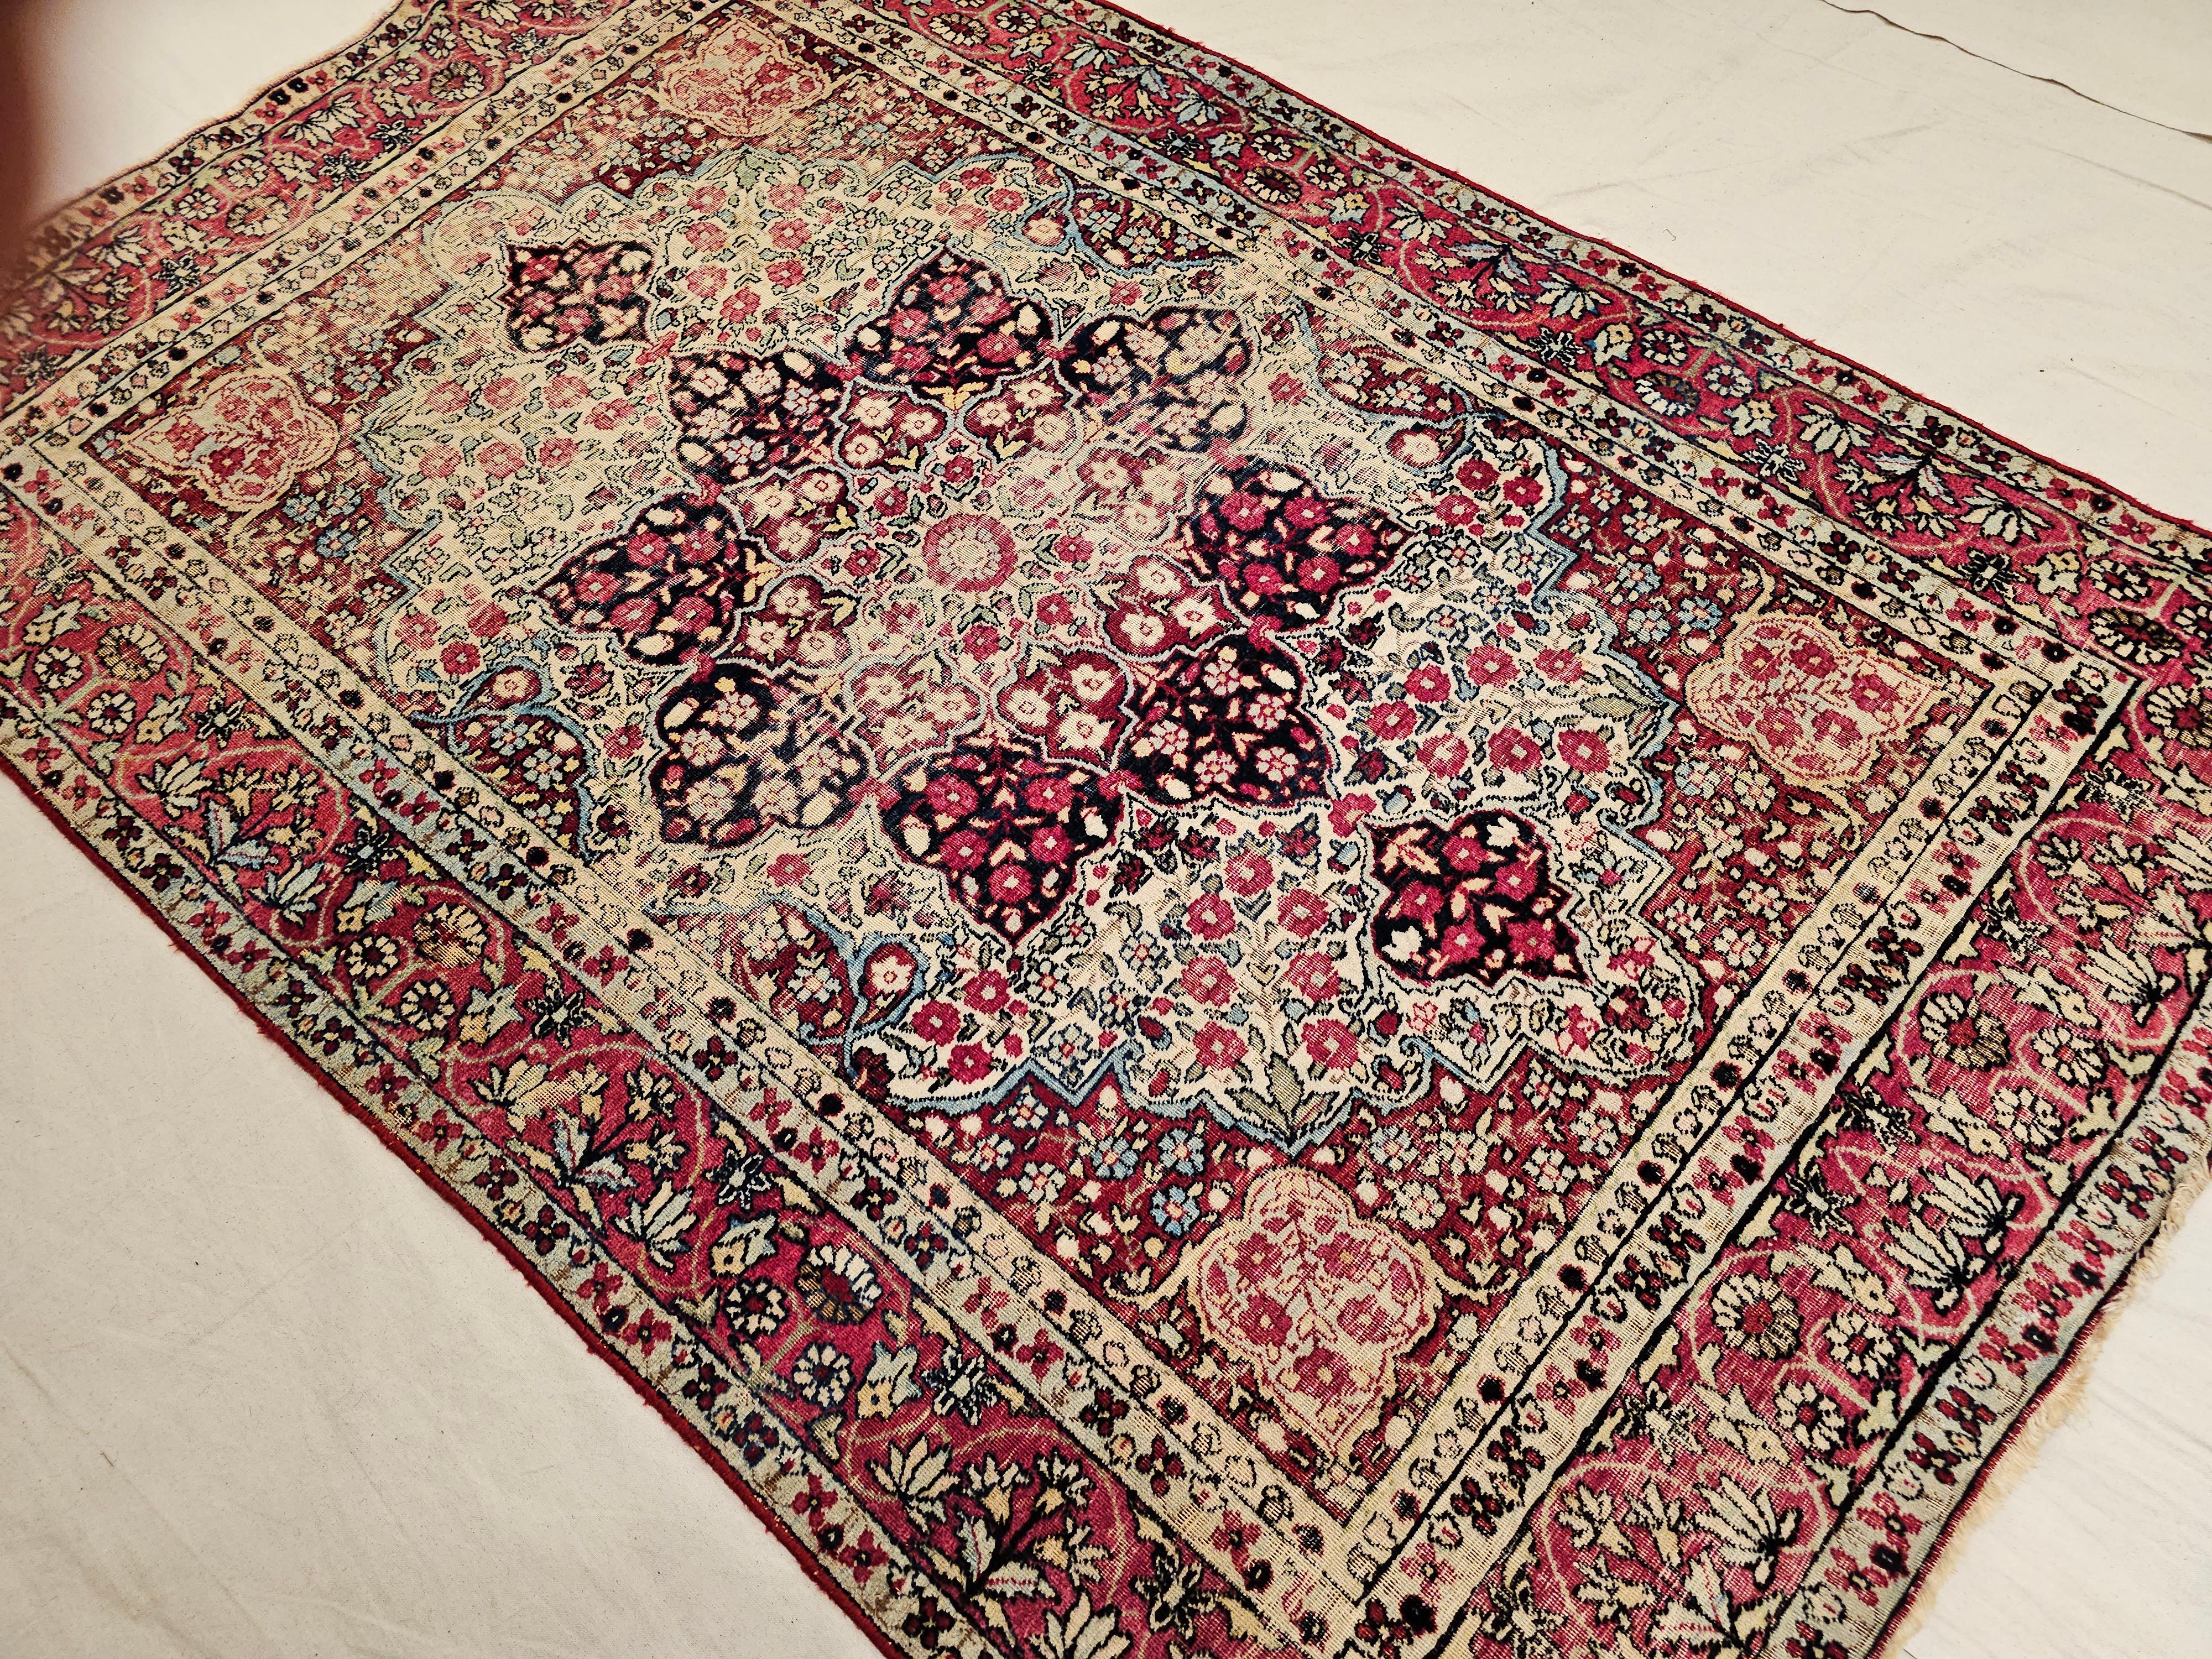 19th Century Persian Kerman Lavar Area Rug in Floral Design in Red, Ivory, Black For Sale 4